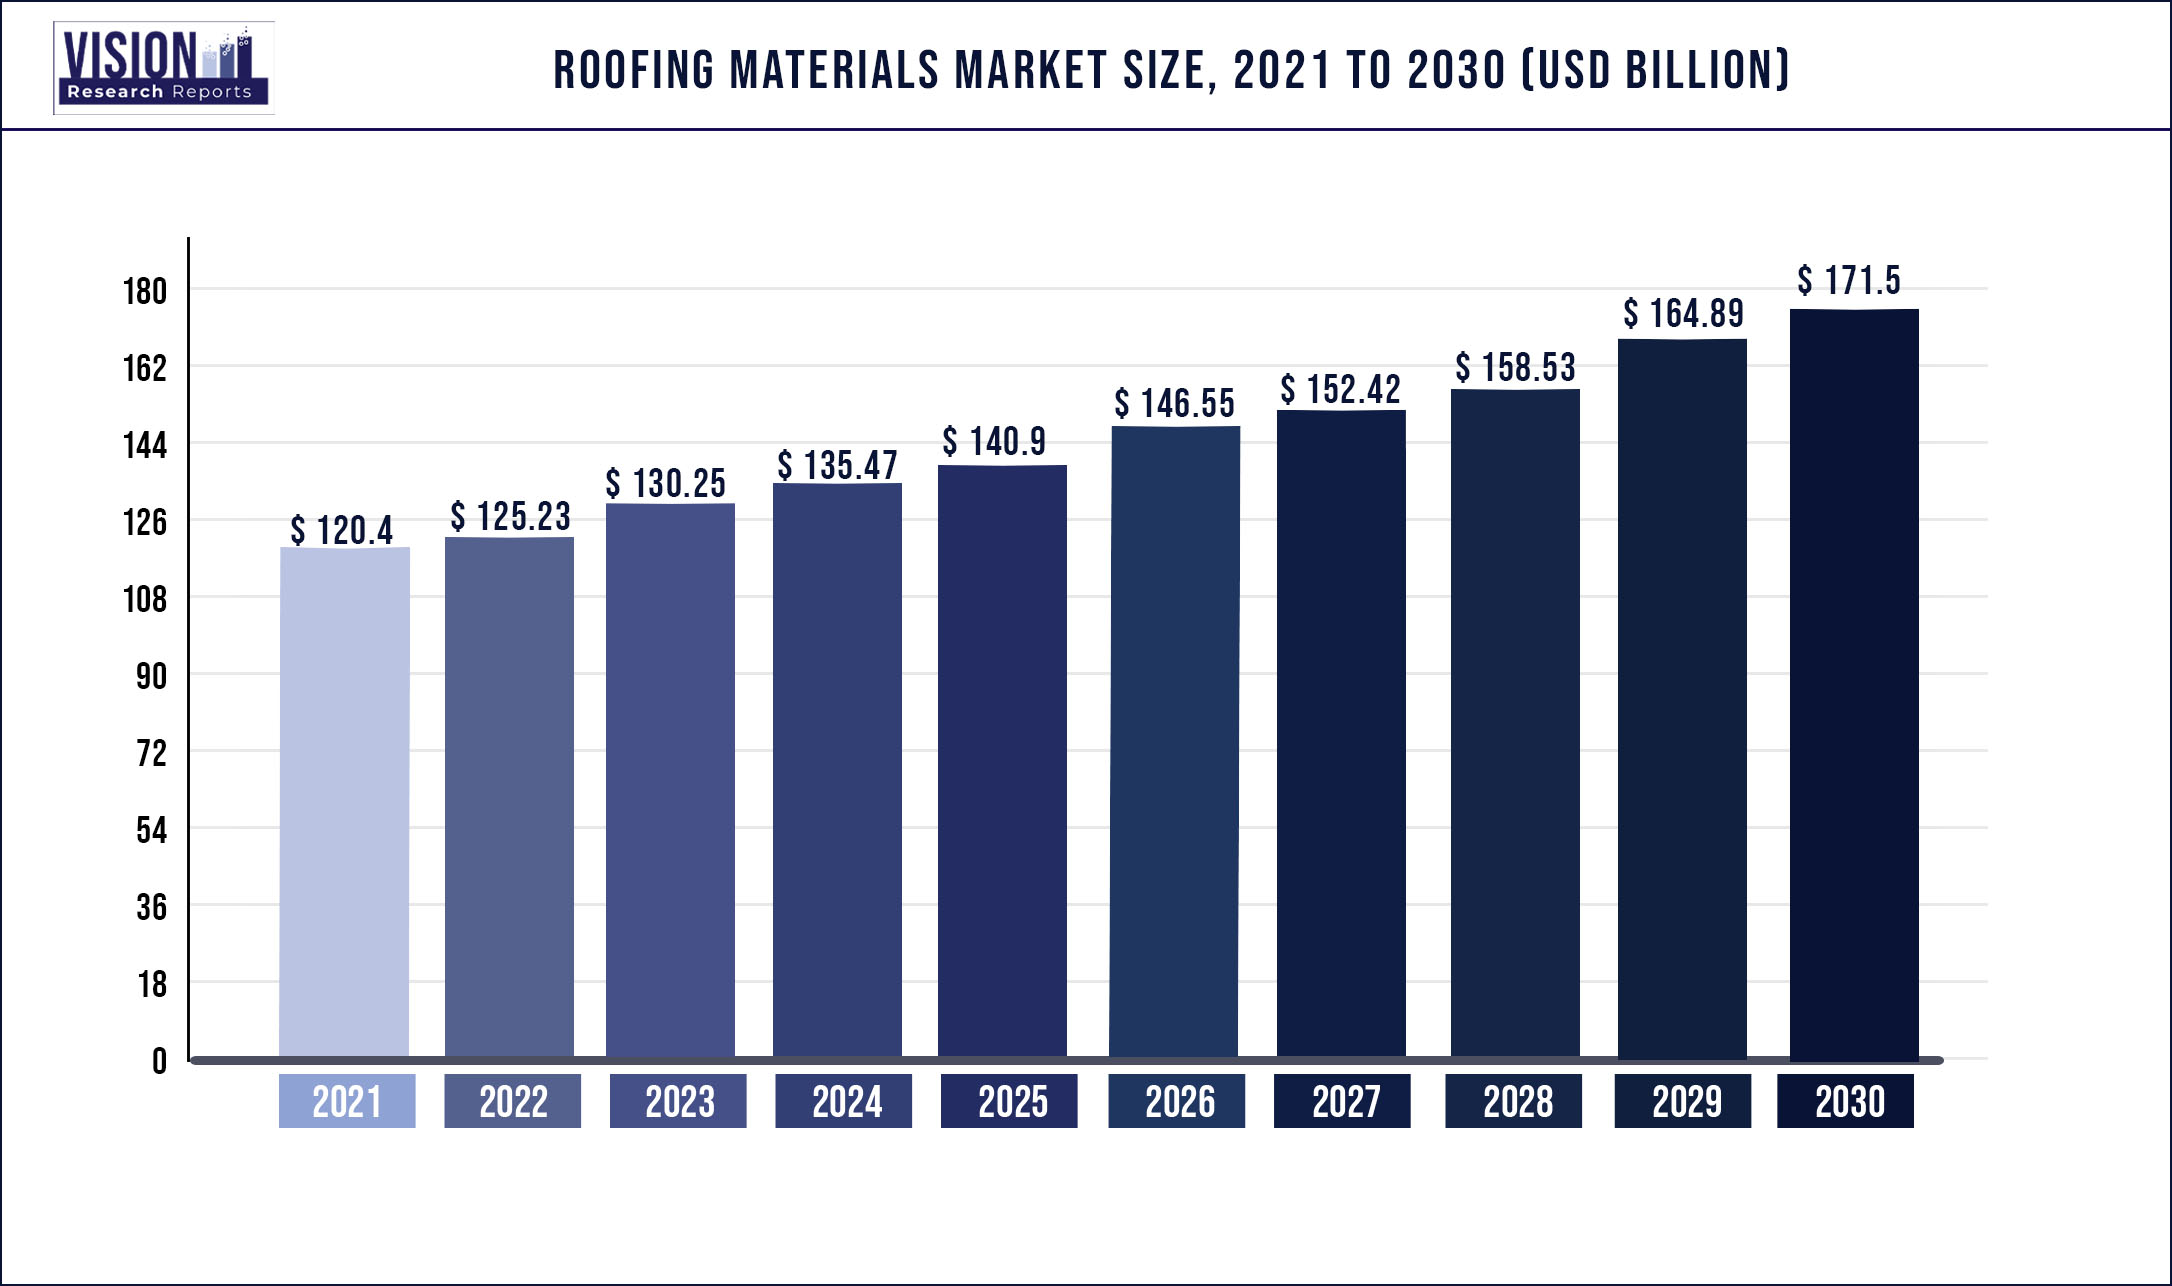 Roofing Materials Market Size 2021 to 2030